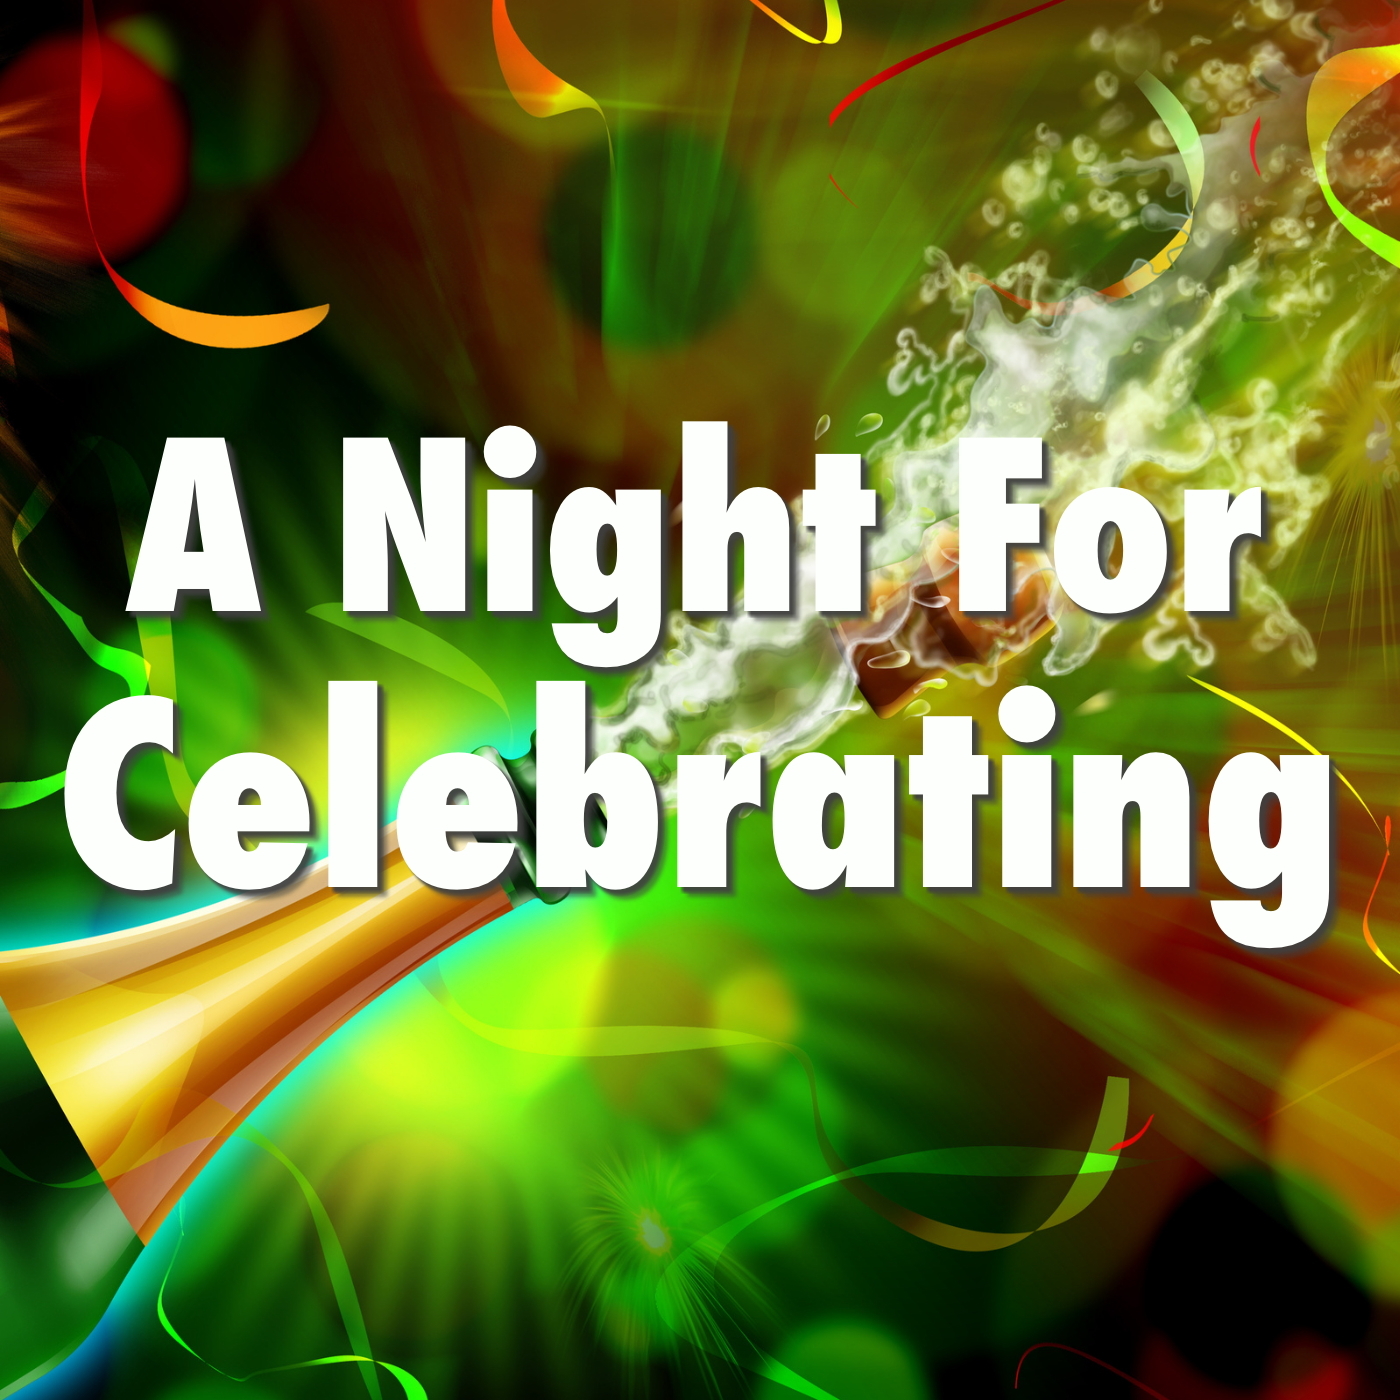 A Night For Celebrating